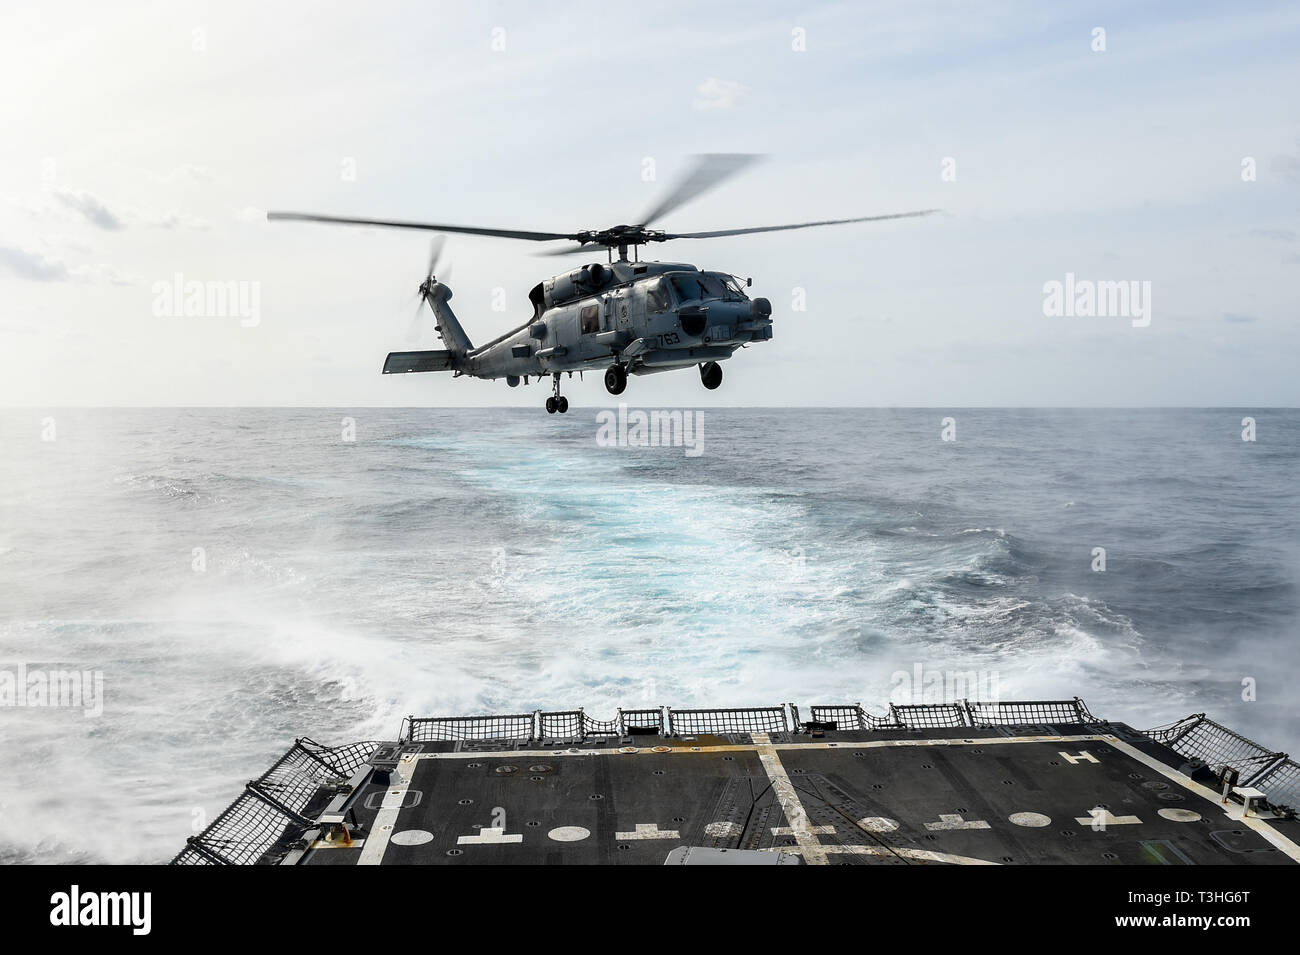 190404-N-UM706-0185 ATLANTIC OCEAN (April 4, 2019) An MH-60R Sea Hawk Helicopter assigned to the “Grandmasters” of Helicopter Maritime Strike Squadron (HSM) 46 takes off of the flight deck aboard the Arleigh Burke-class guided-missile destroyer USS Nitze (DDG 94). Nitze is underway as part of Abraham Lincoln Carrier Strike Group (ABECSG) deployment in support of maritime security cooperation efforts in the U.S. 5th, 6th and 7th Fleet areas of responsibility. With Abraham Lincoln as the flagship, deployed strike group assets include staffs, ships and aircraft of Carrier Strike Group 12 (CSG 12) Stock Photo